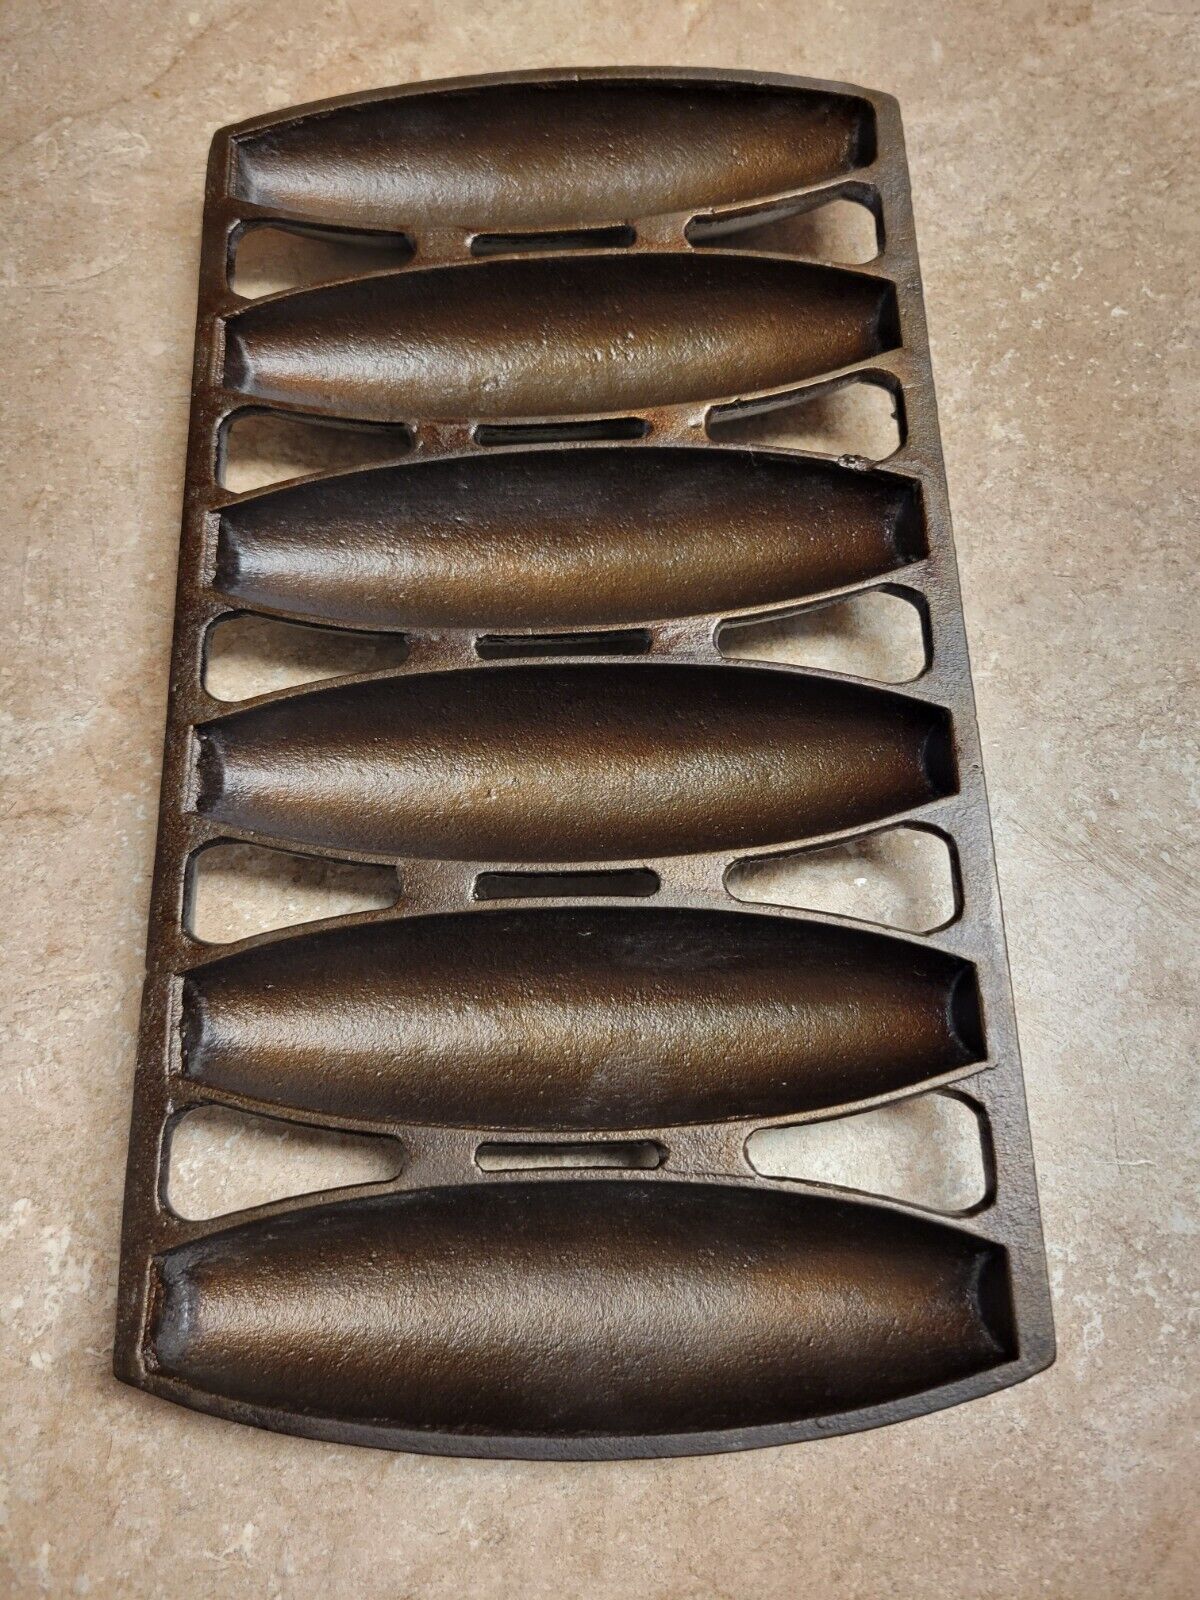 Griswold No.6 P/N 958 Vienna roll pan